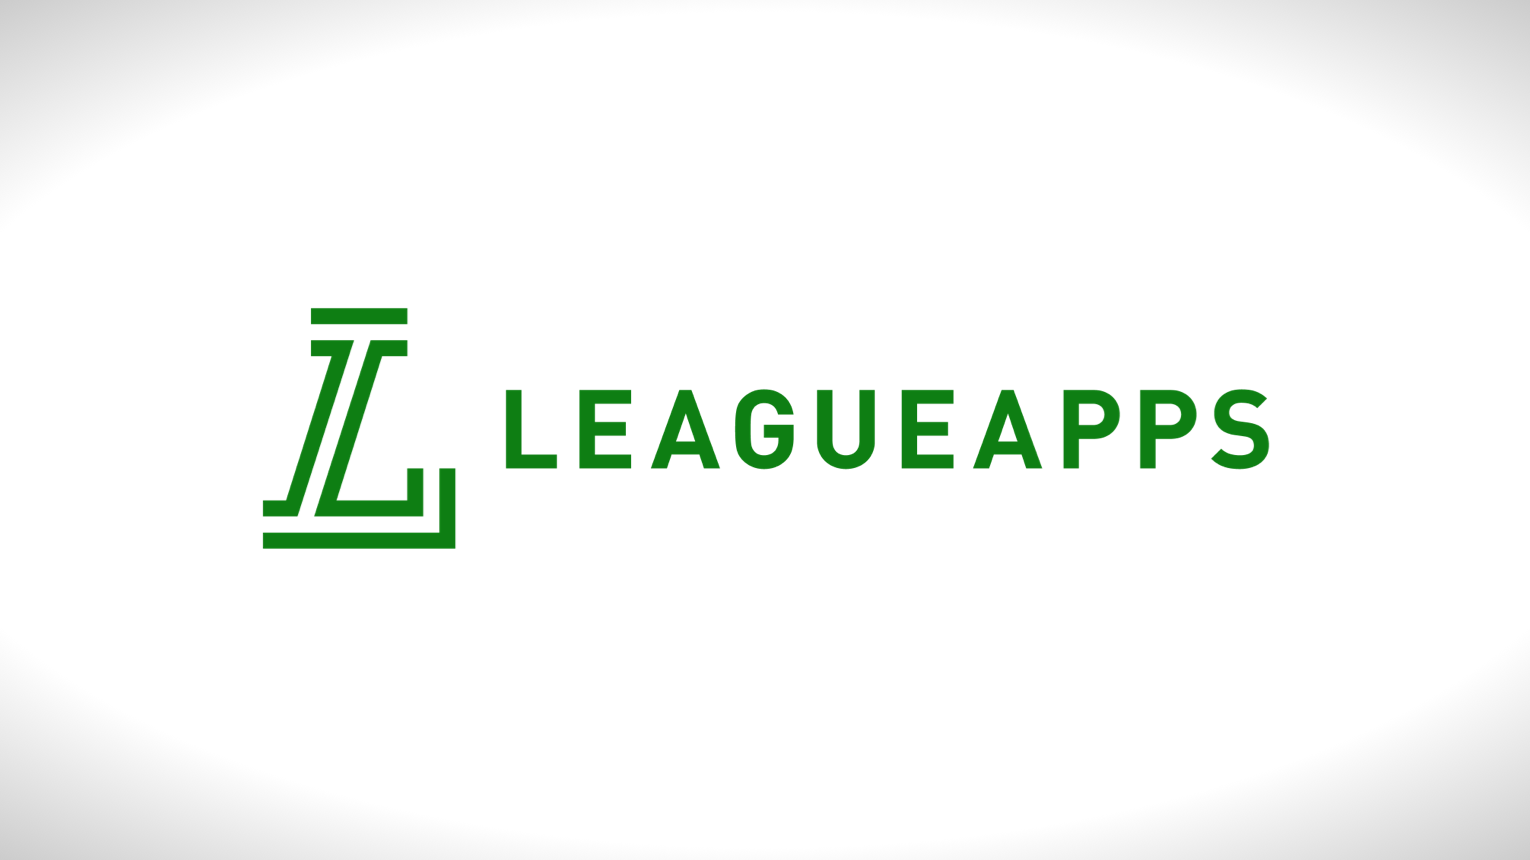 How My Poppy’s Love of Sports Inspired LeagueApps